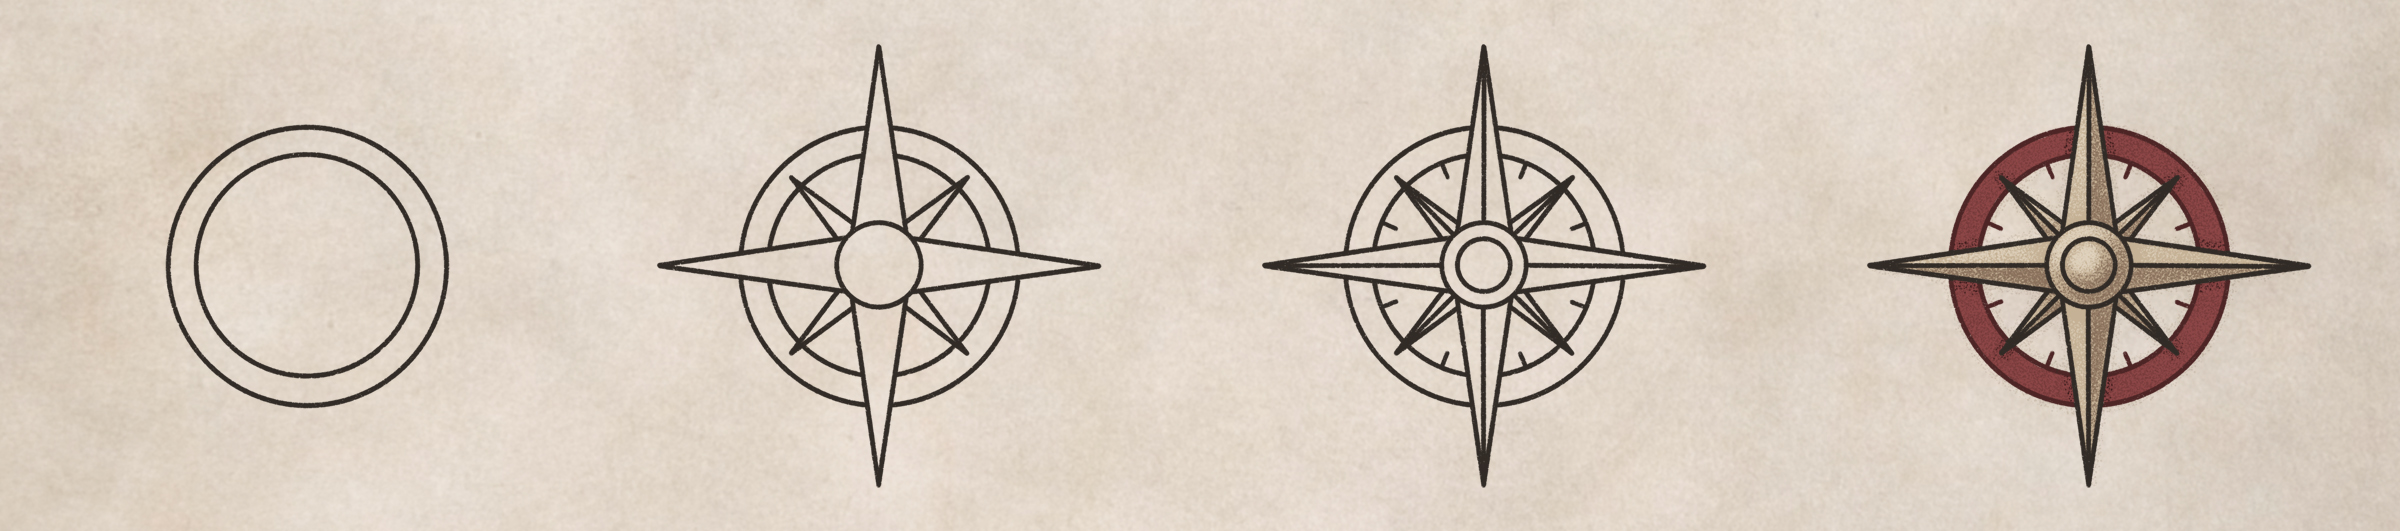 How-To-Draw-Compass-Map.jpg